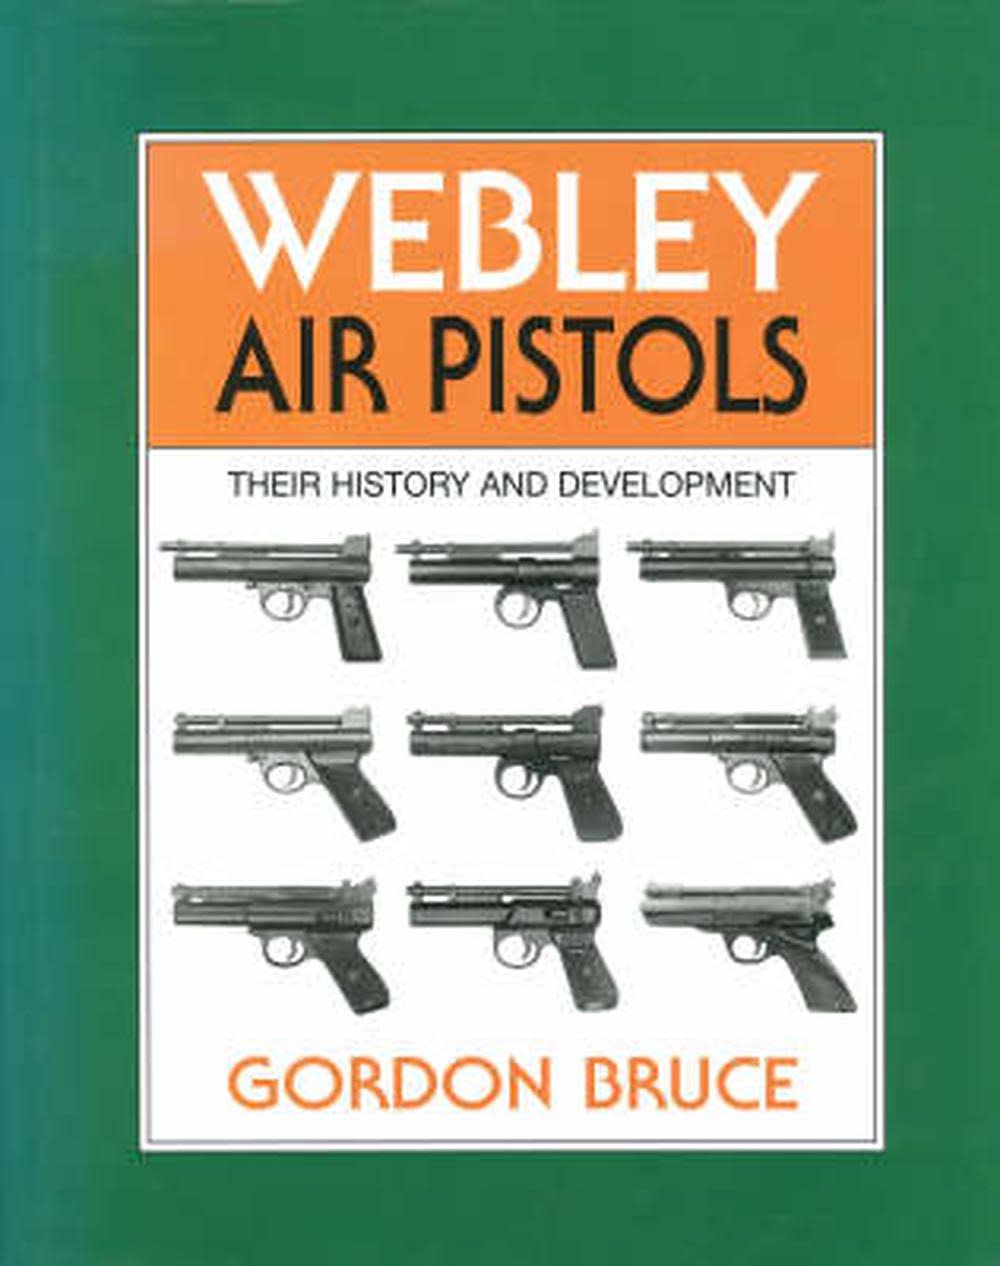 Webley Air Pistols: Their History and Development [Book] - WGL-03